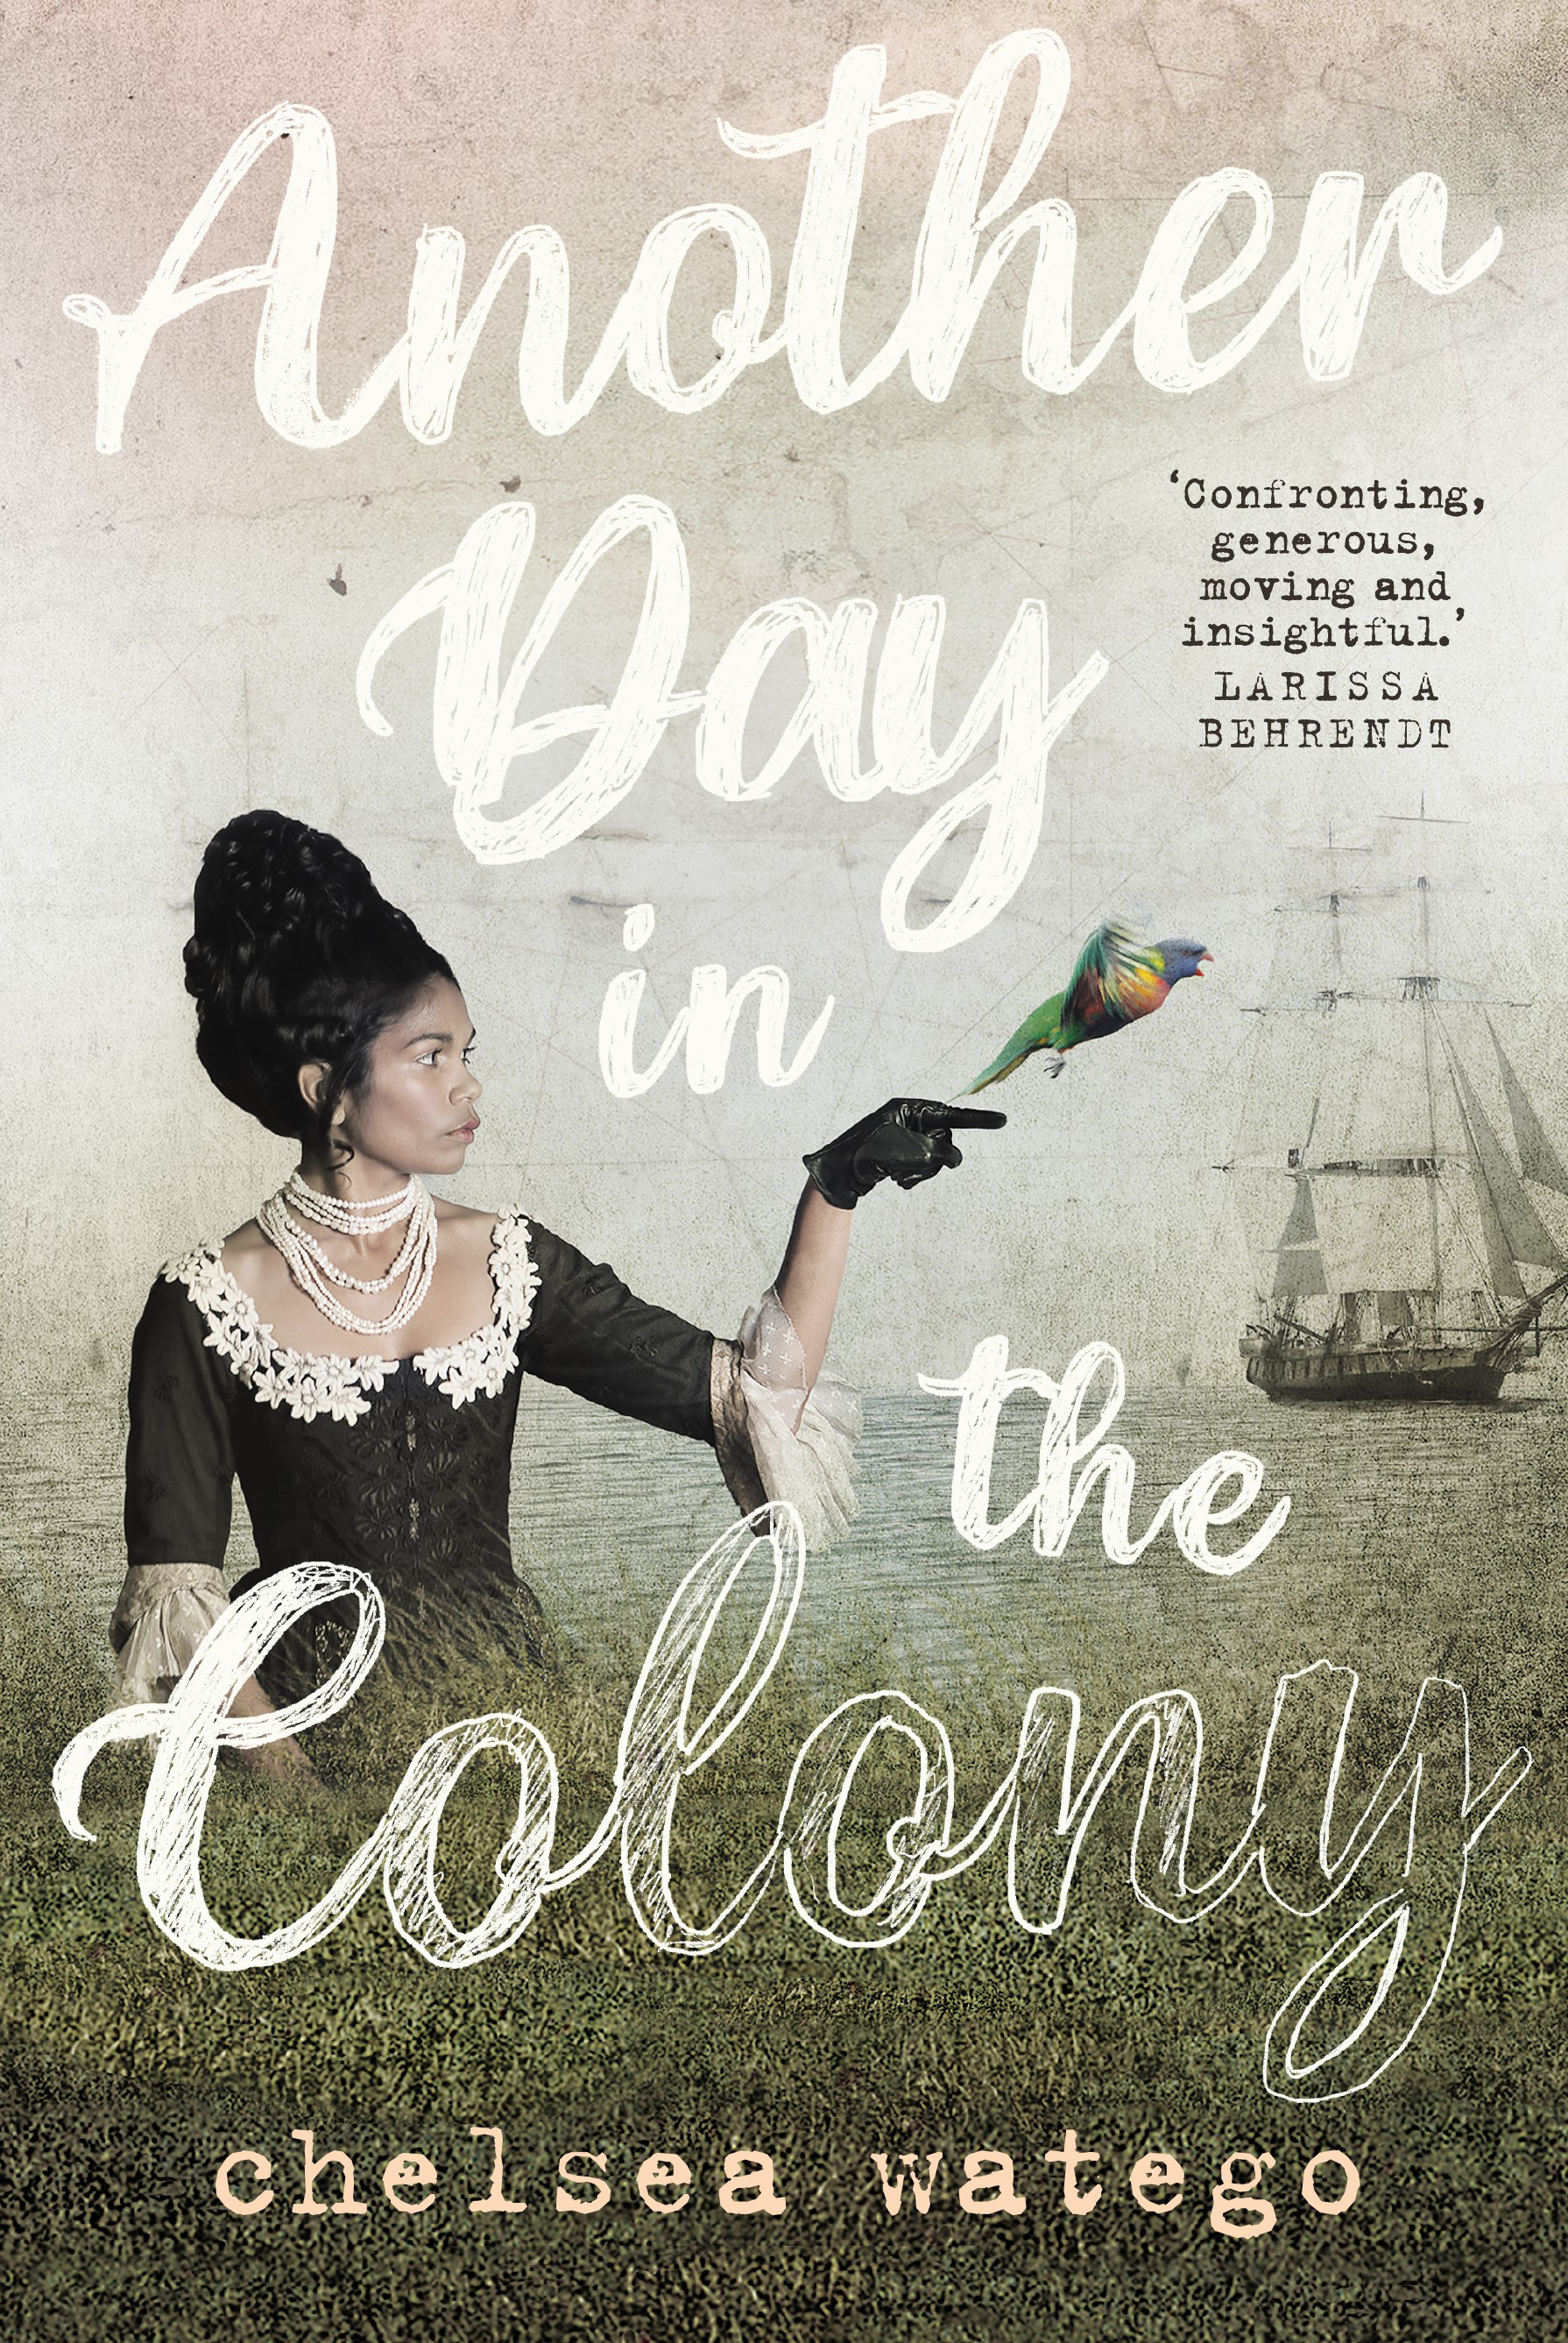 Cover of Another Day in the Colony by Chelsea Watego. Pencilled white words over an image of an Aboriginal woman in a black dress with a bird and a First Fleet ship and